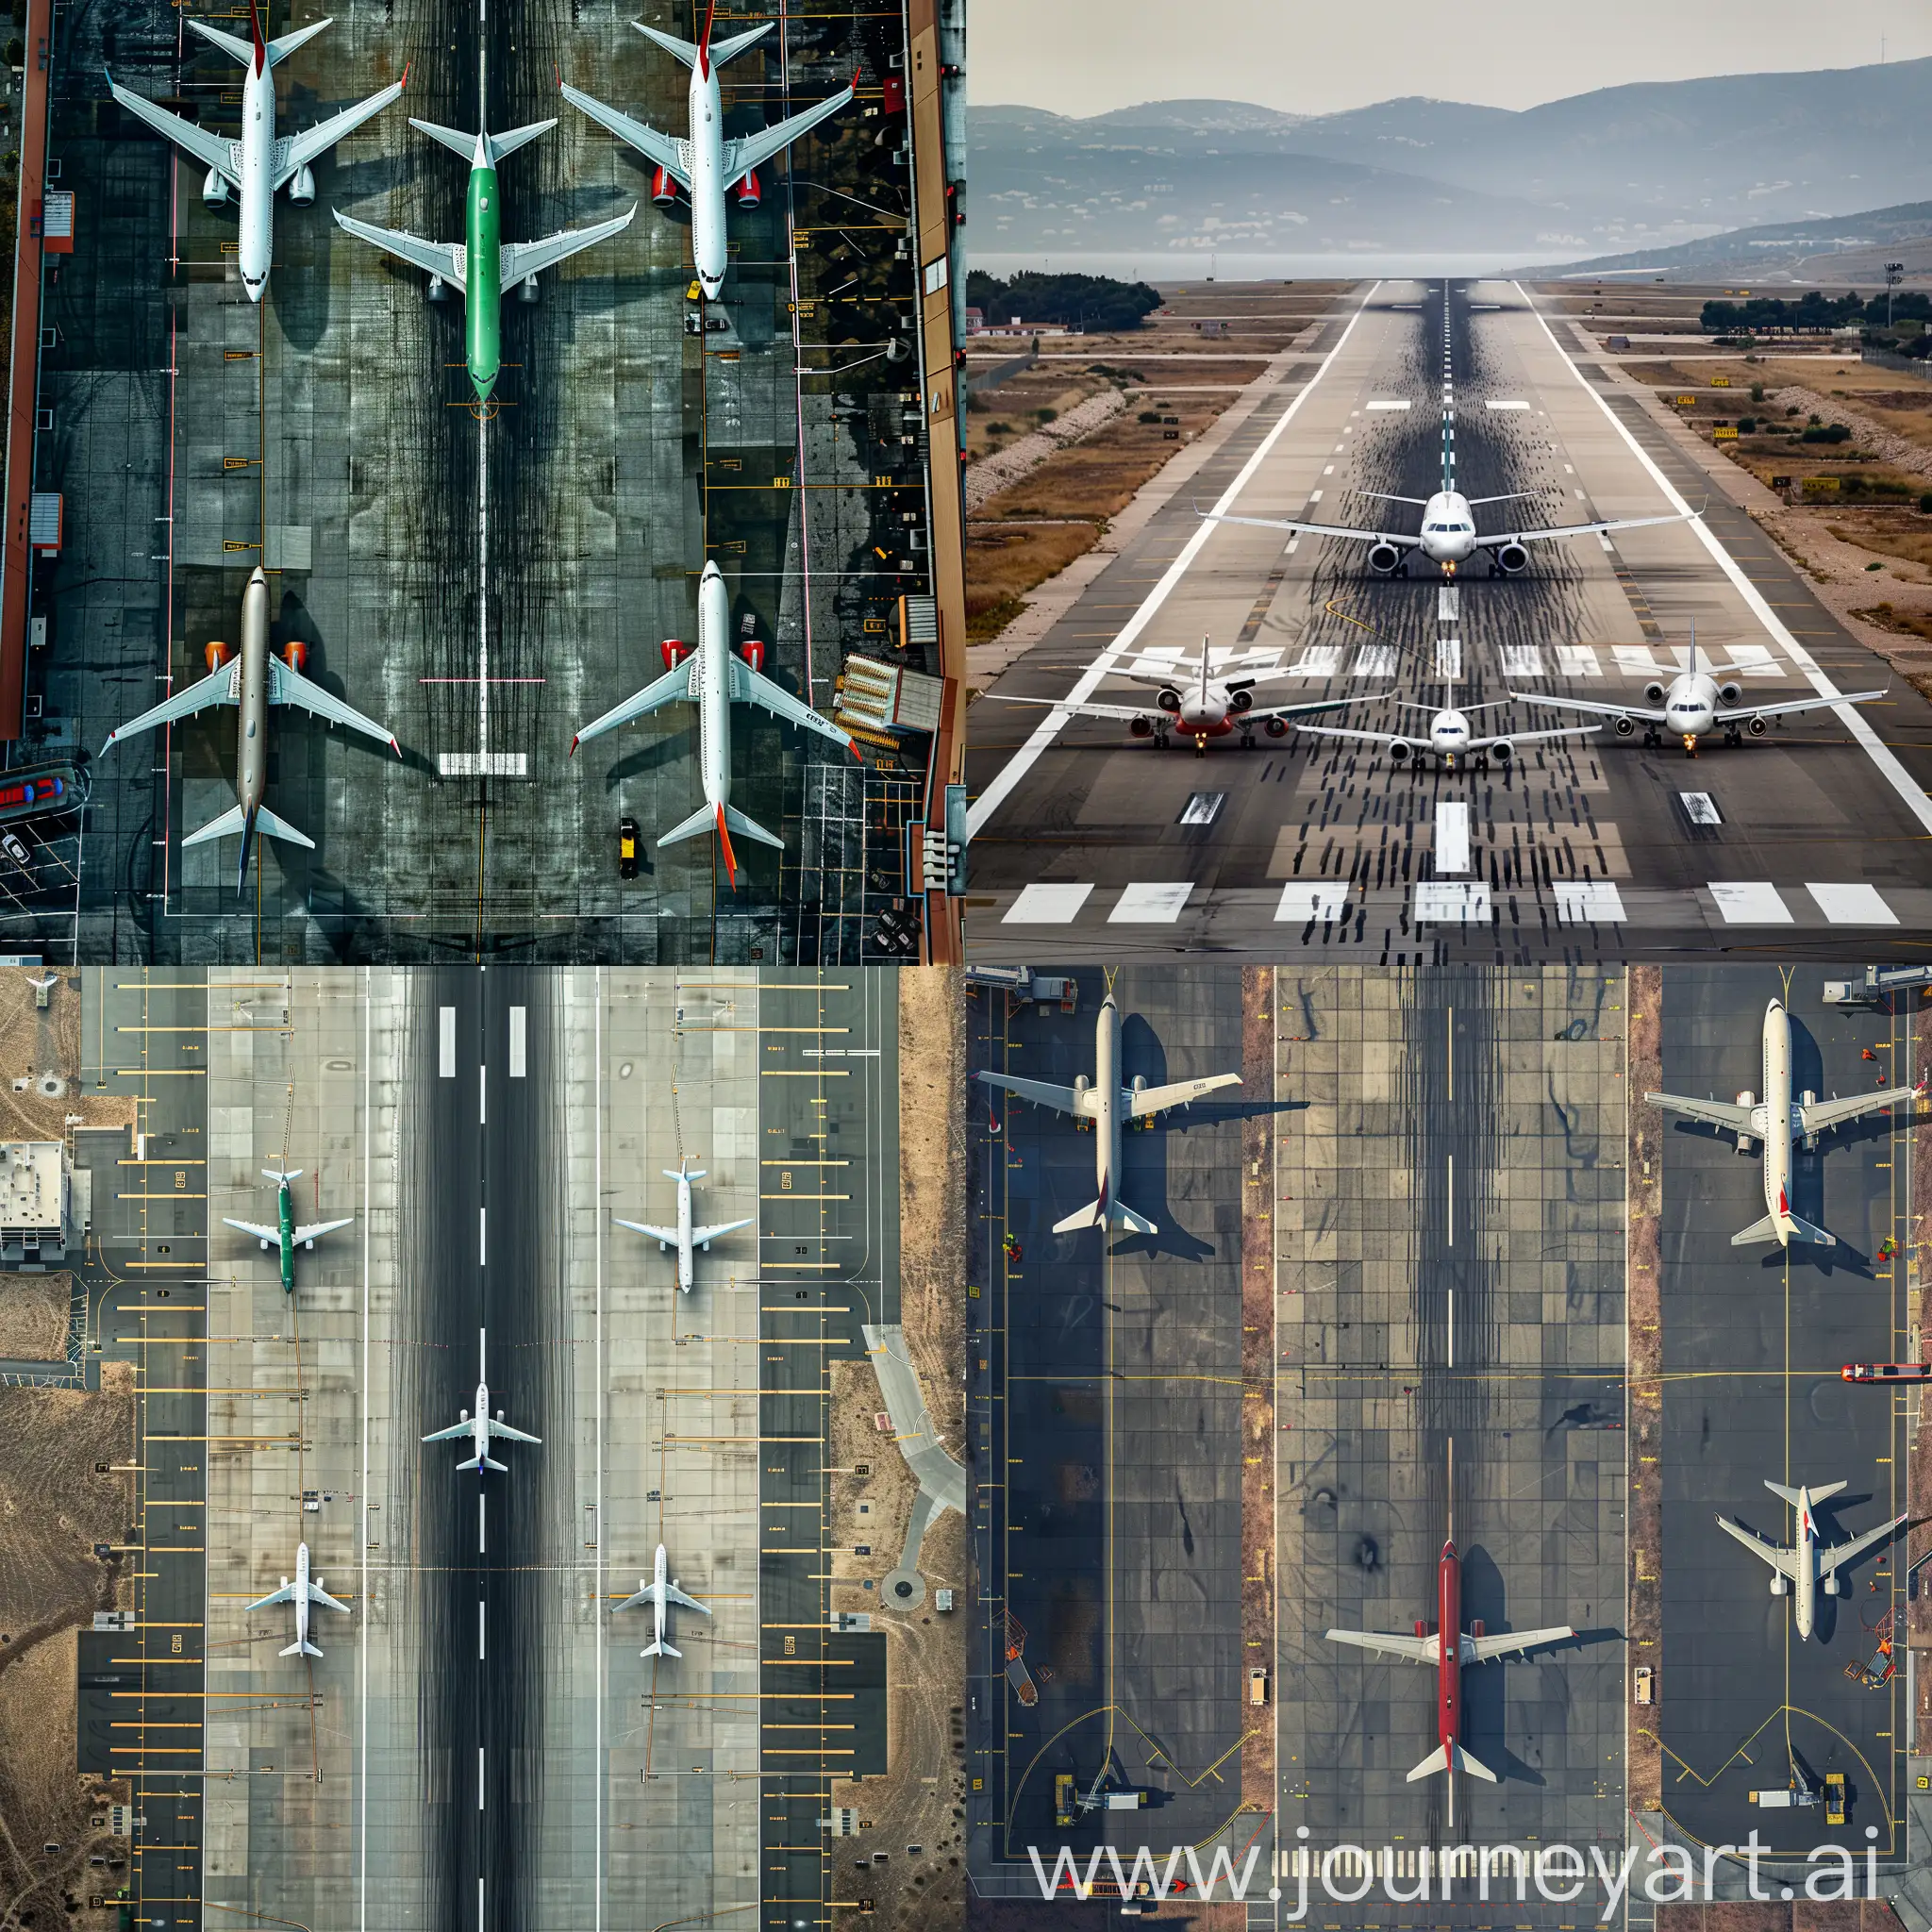 Commercial-Airplanes-Landing-on-Empty-Runway